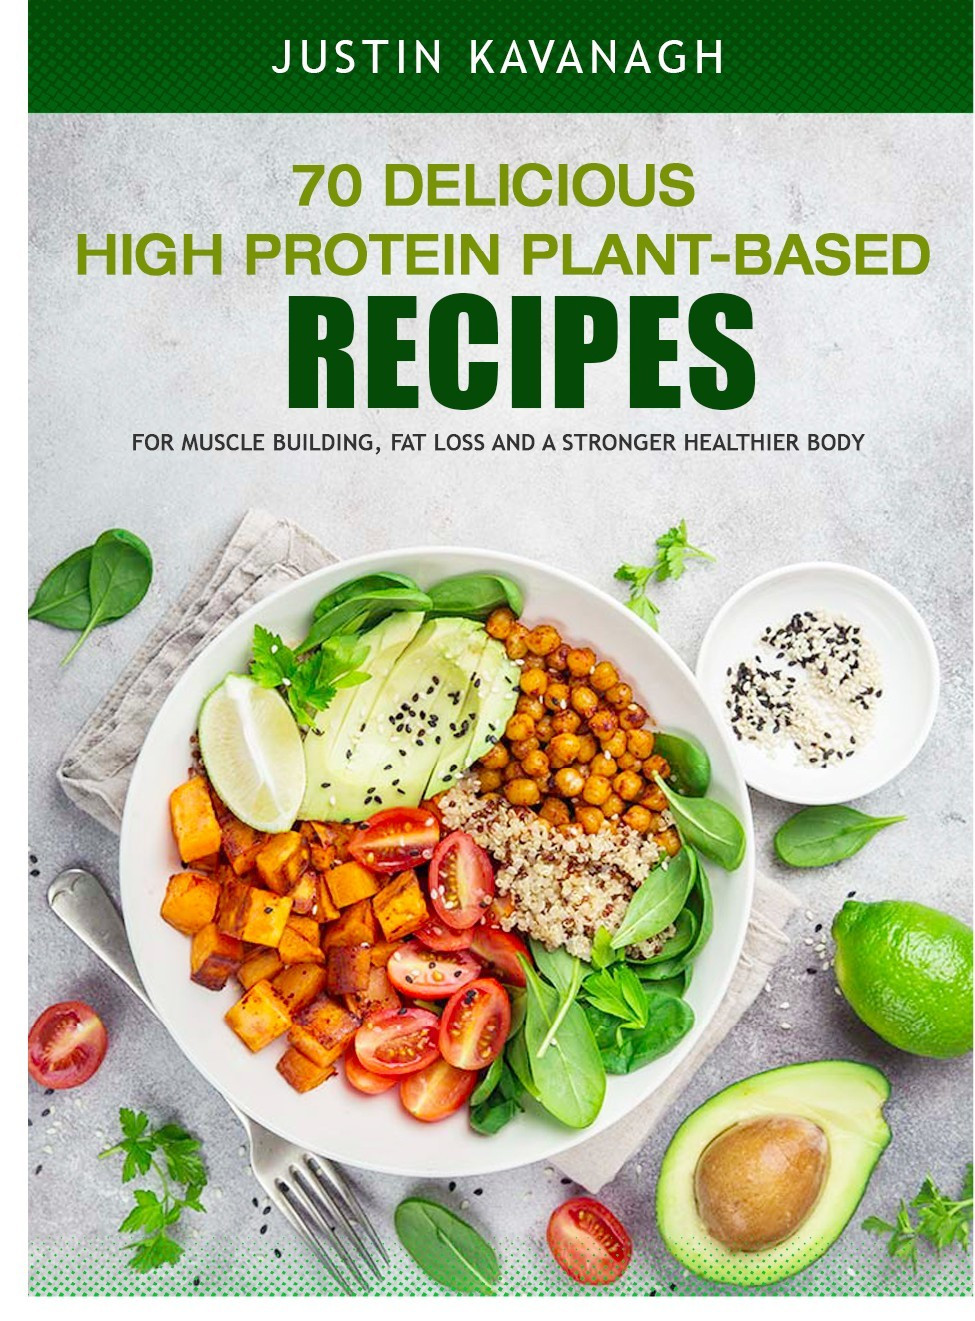 Plant Based Recipes Protein
 70 Delicious High Protein Plant Based Recipes